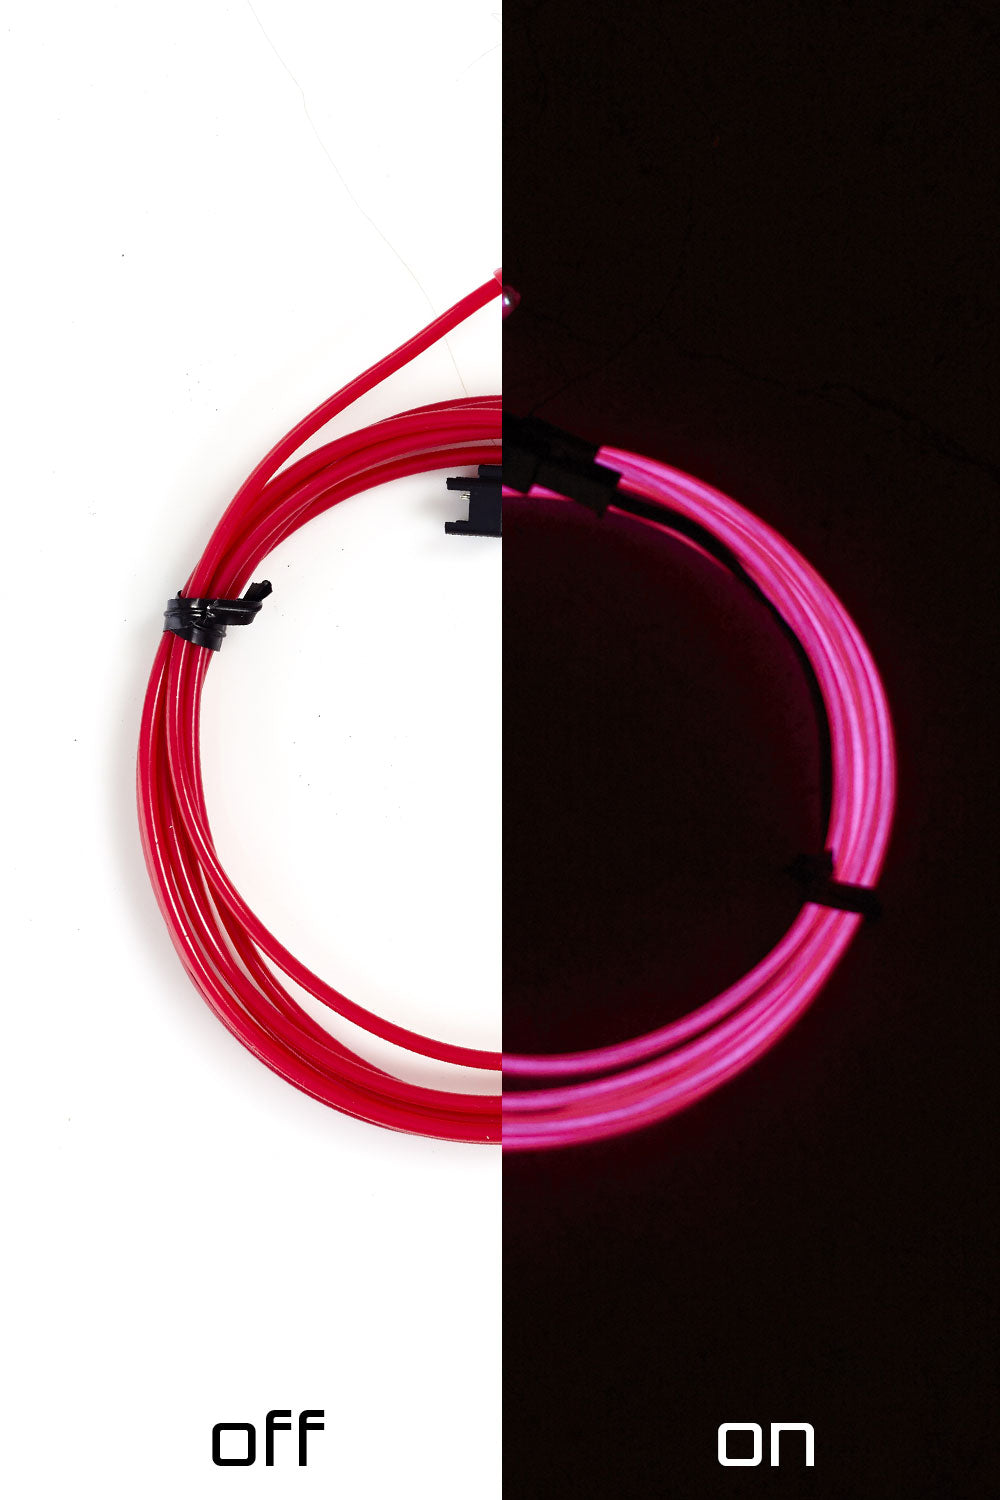 6 Foot Electroluminescent Wire Kit